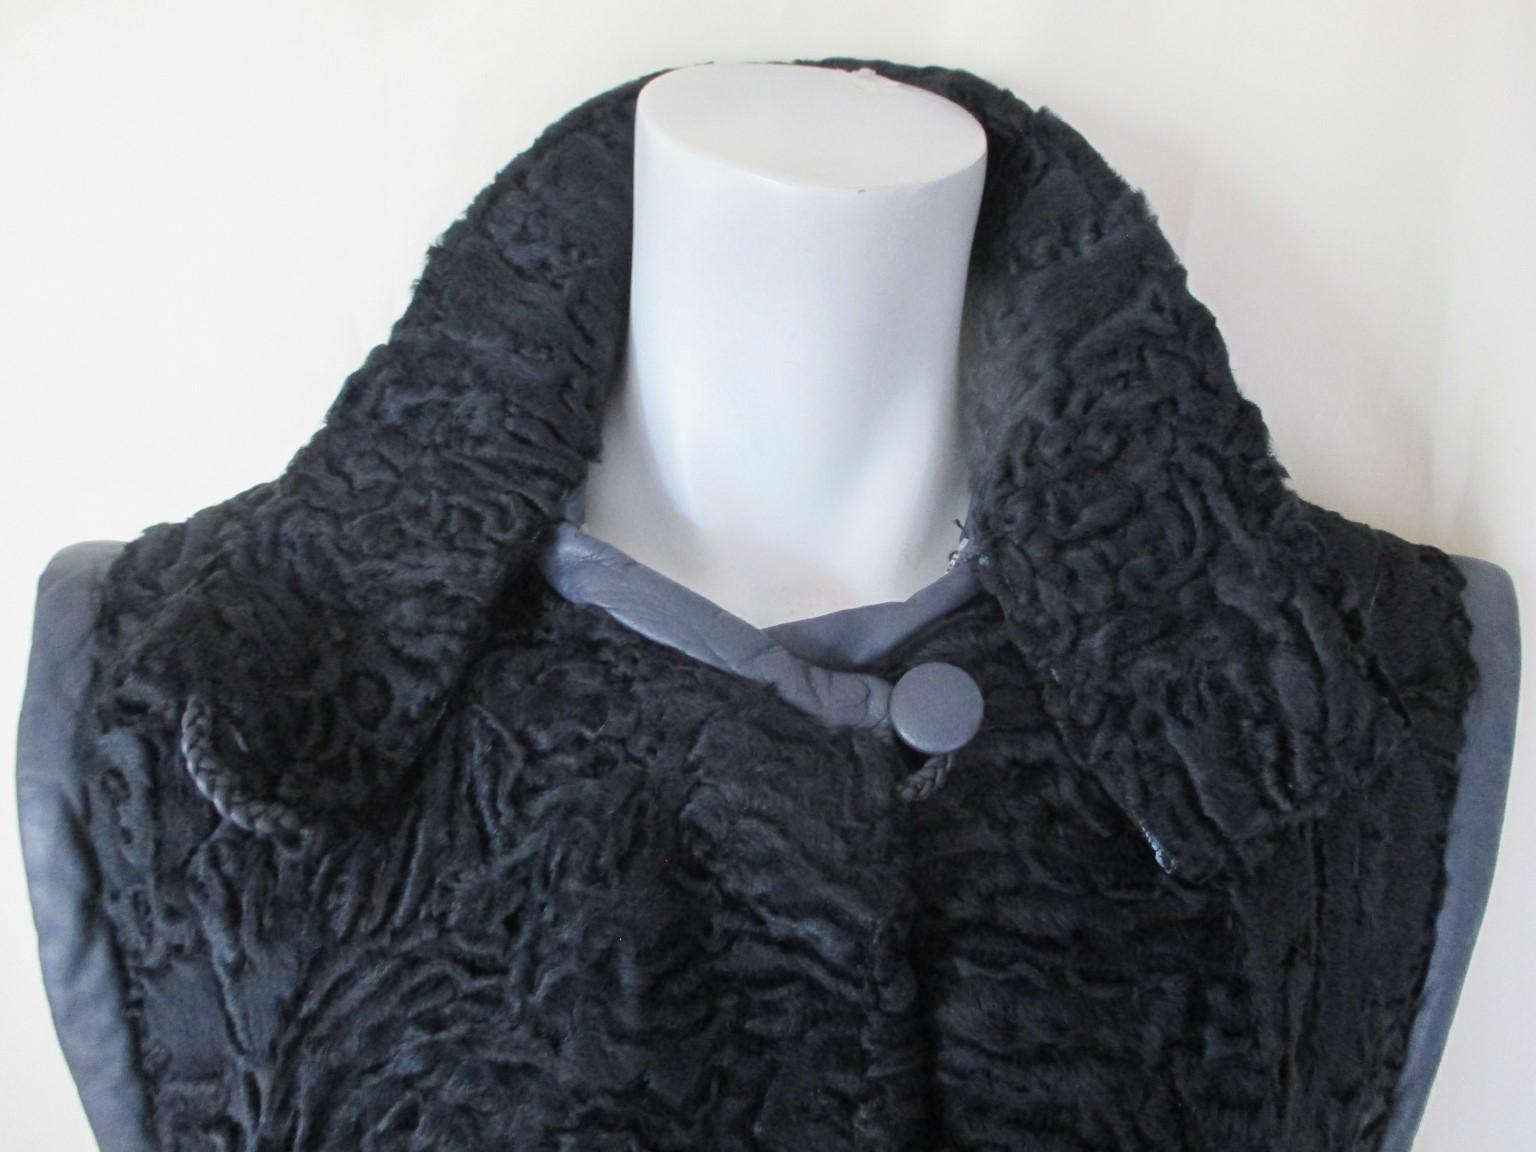 This coat is made from Persian lamb fur with detachable leather sleeves which closes with a zipper.
Color: Blue (dyed)
It has 2 velvet pockets, 2 buttons at the collar and 3 closing hooks.
size is about Medium/Large